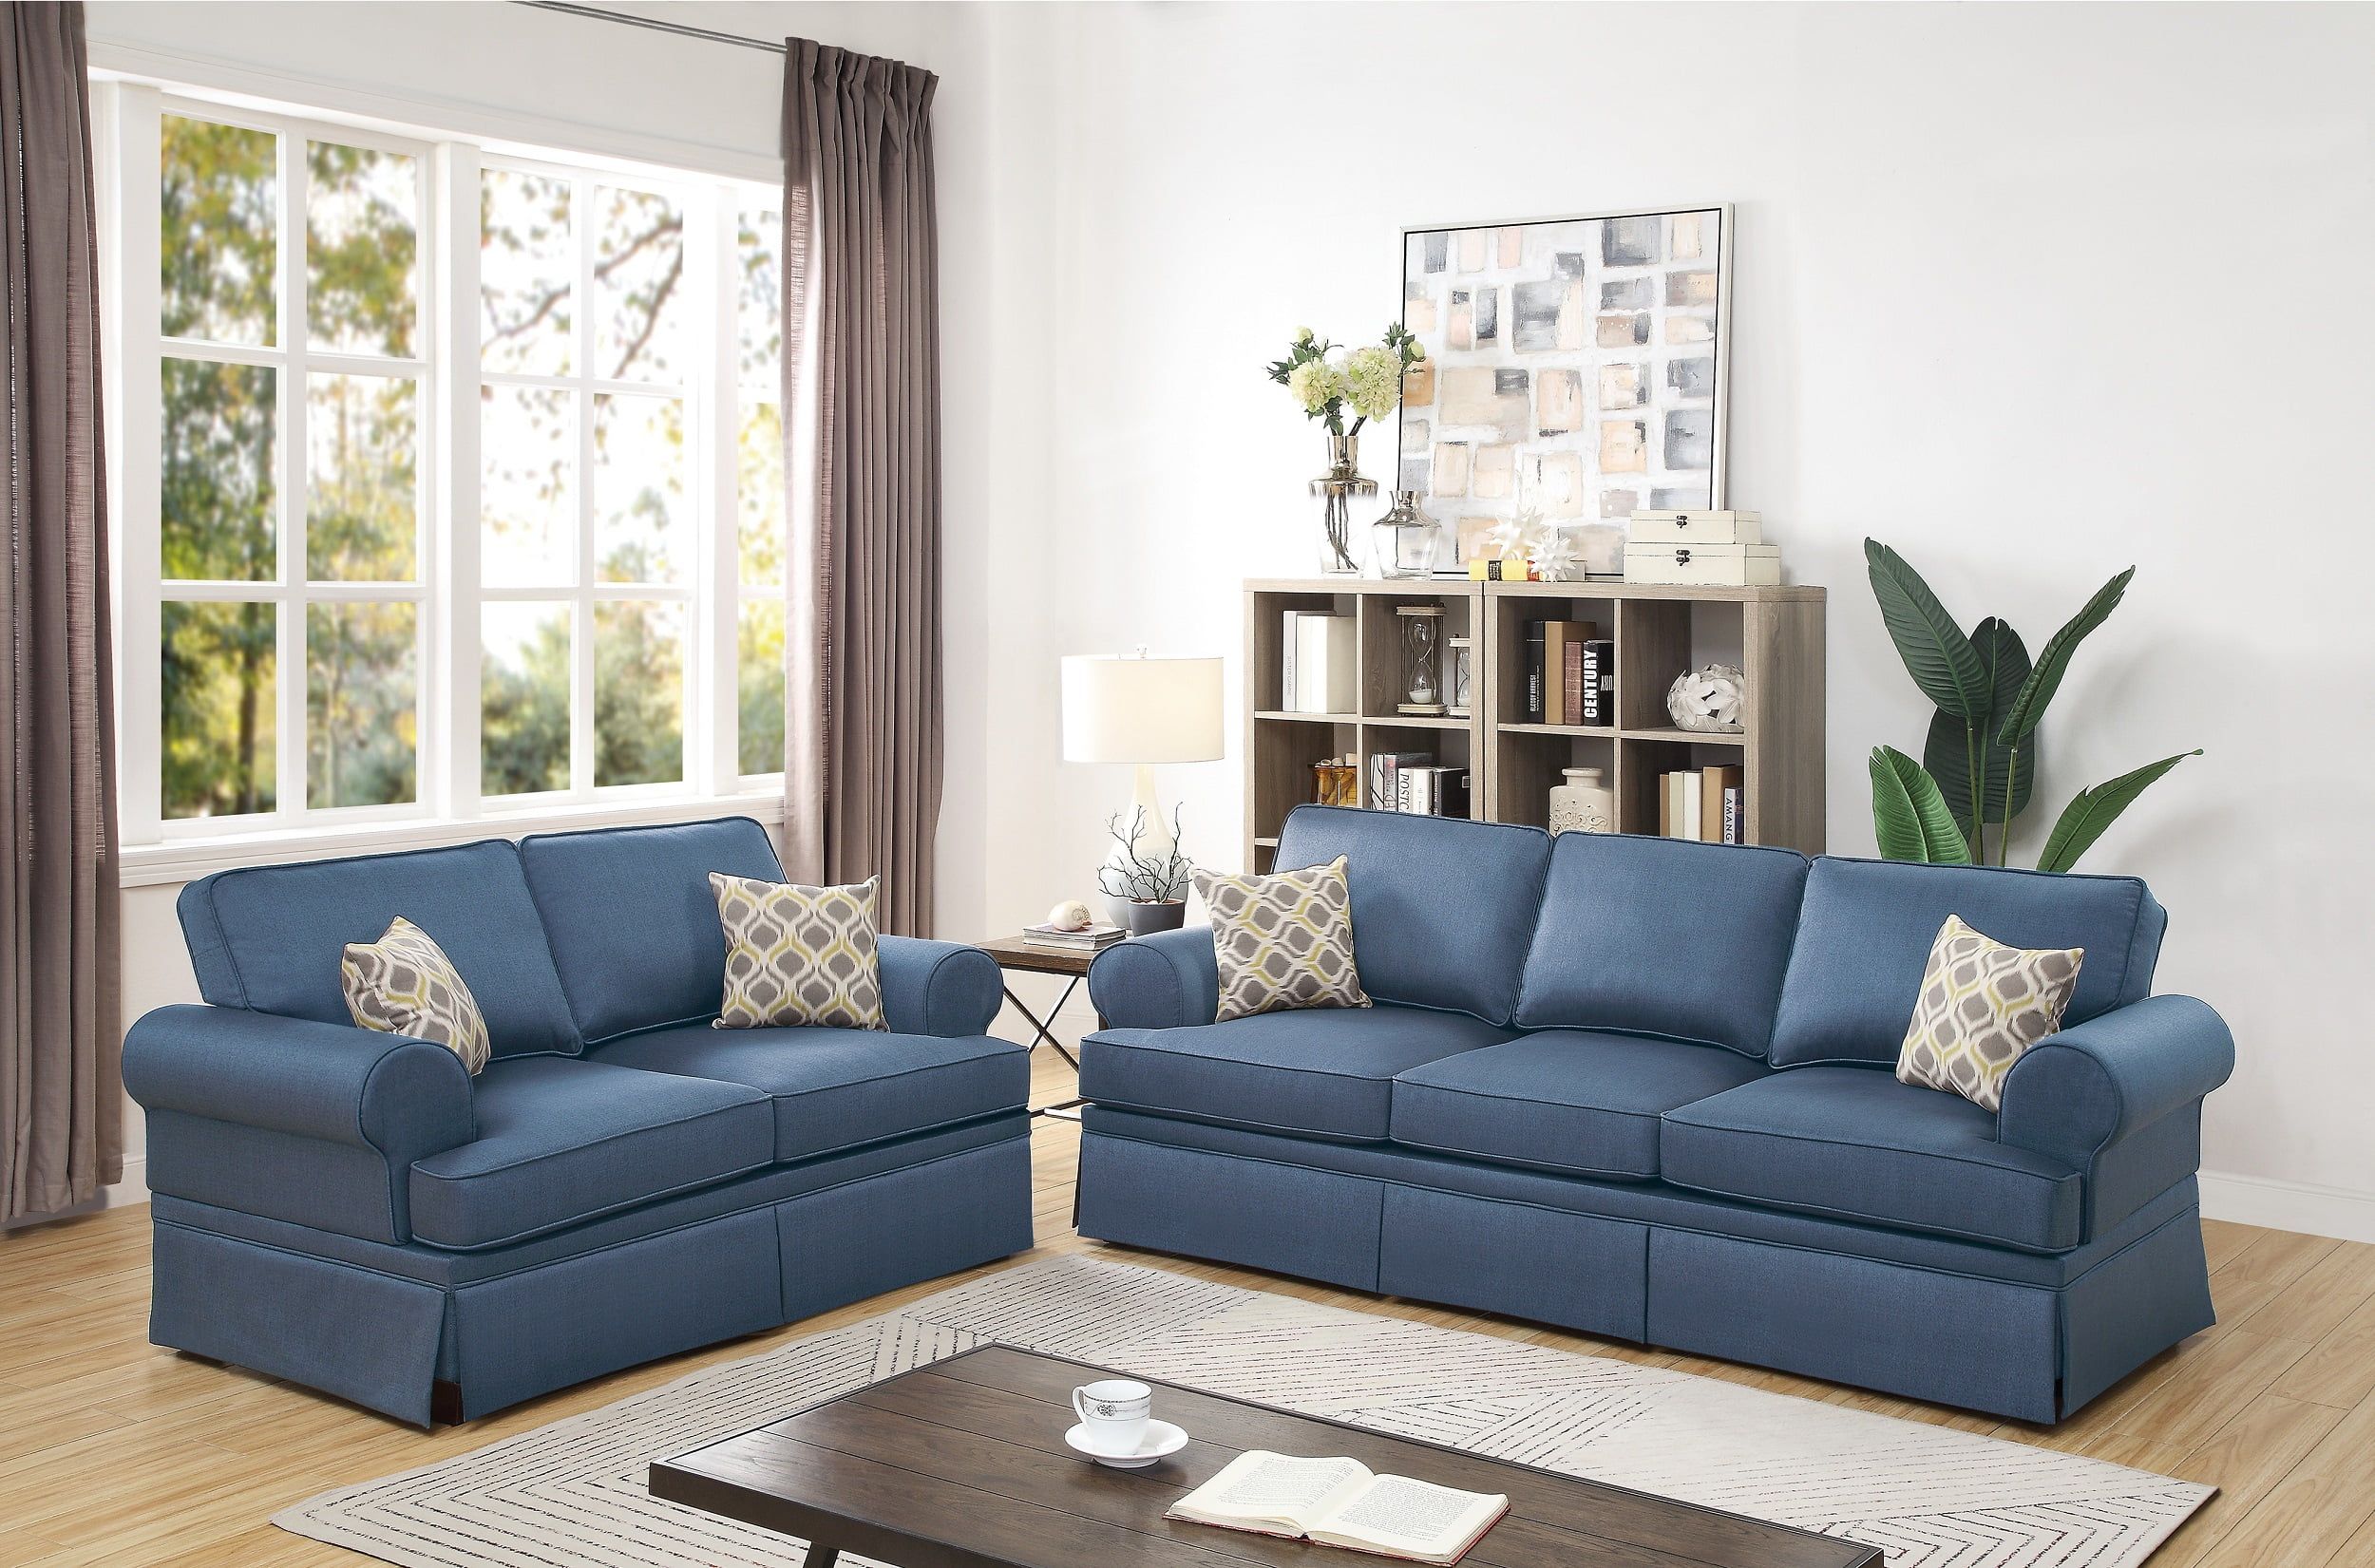 Classic Comfort Cozy Living Room 2pc Sofa Set Sofa And Loveseat Blue Intended For Sofas In Blue (Gallery 9 of 20)